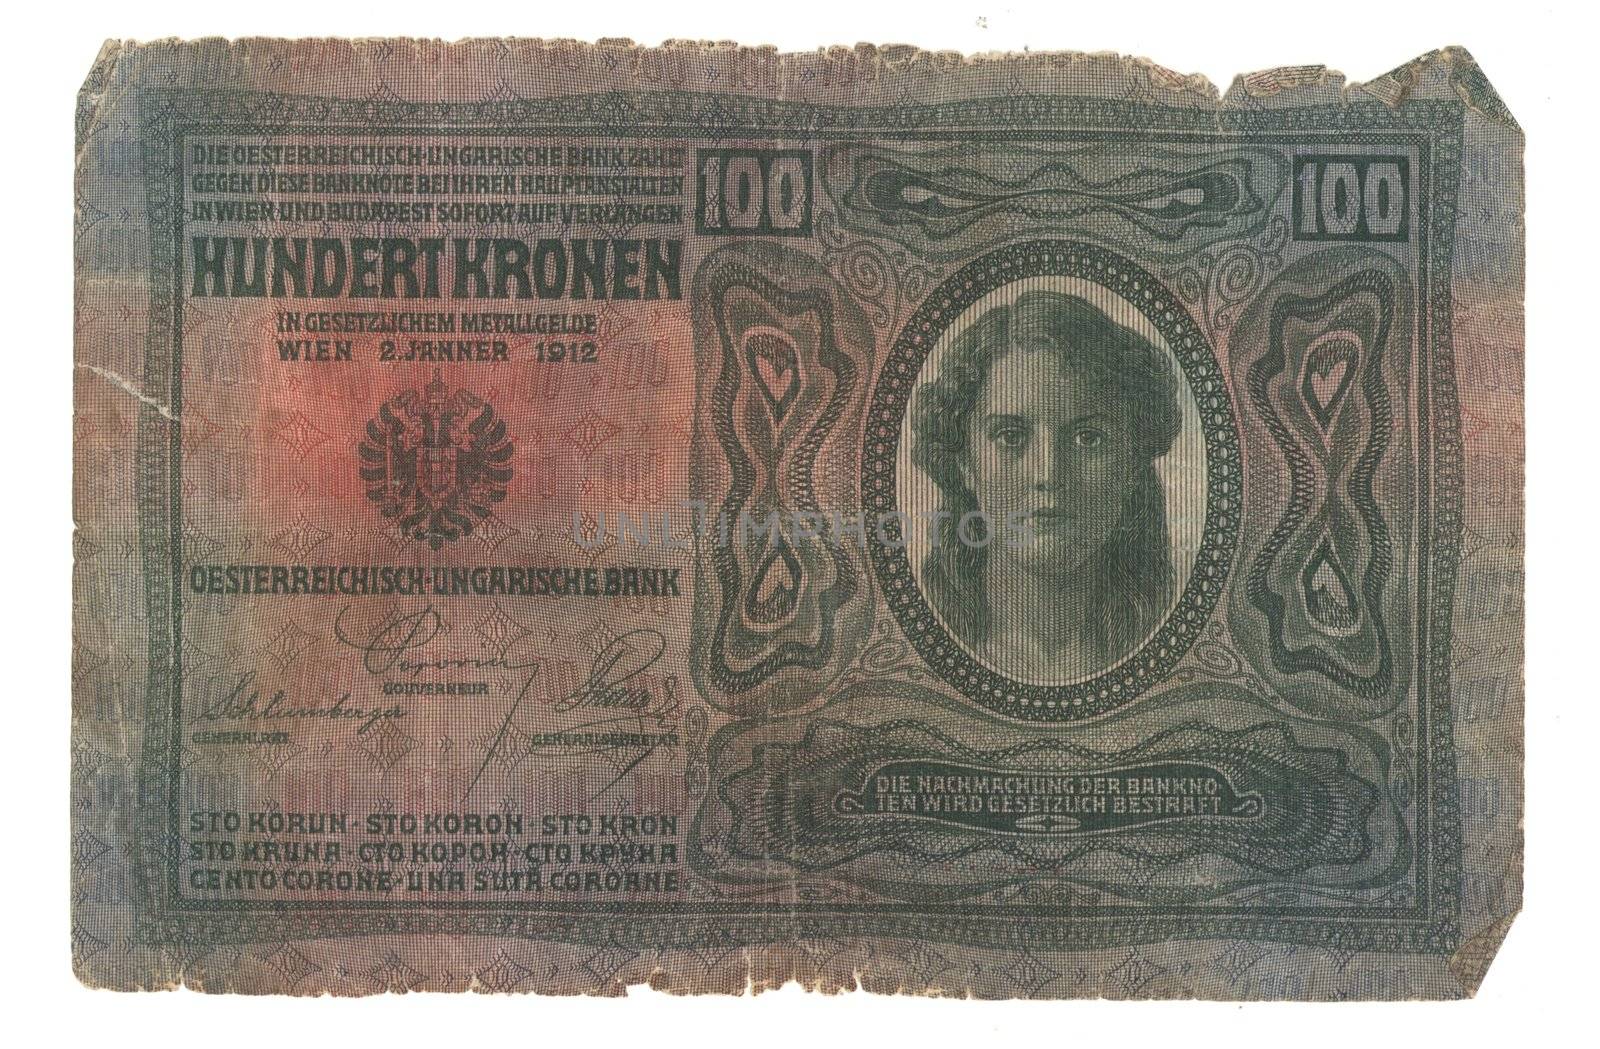 High-resolution picture of very old Hungarian banknote (1912)